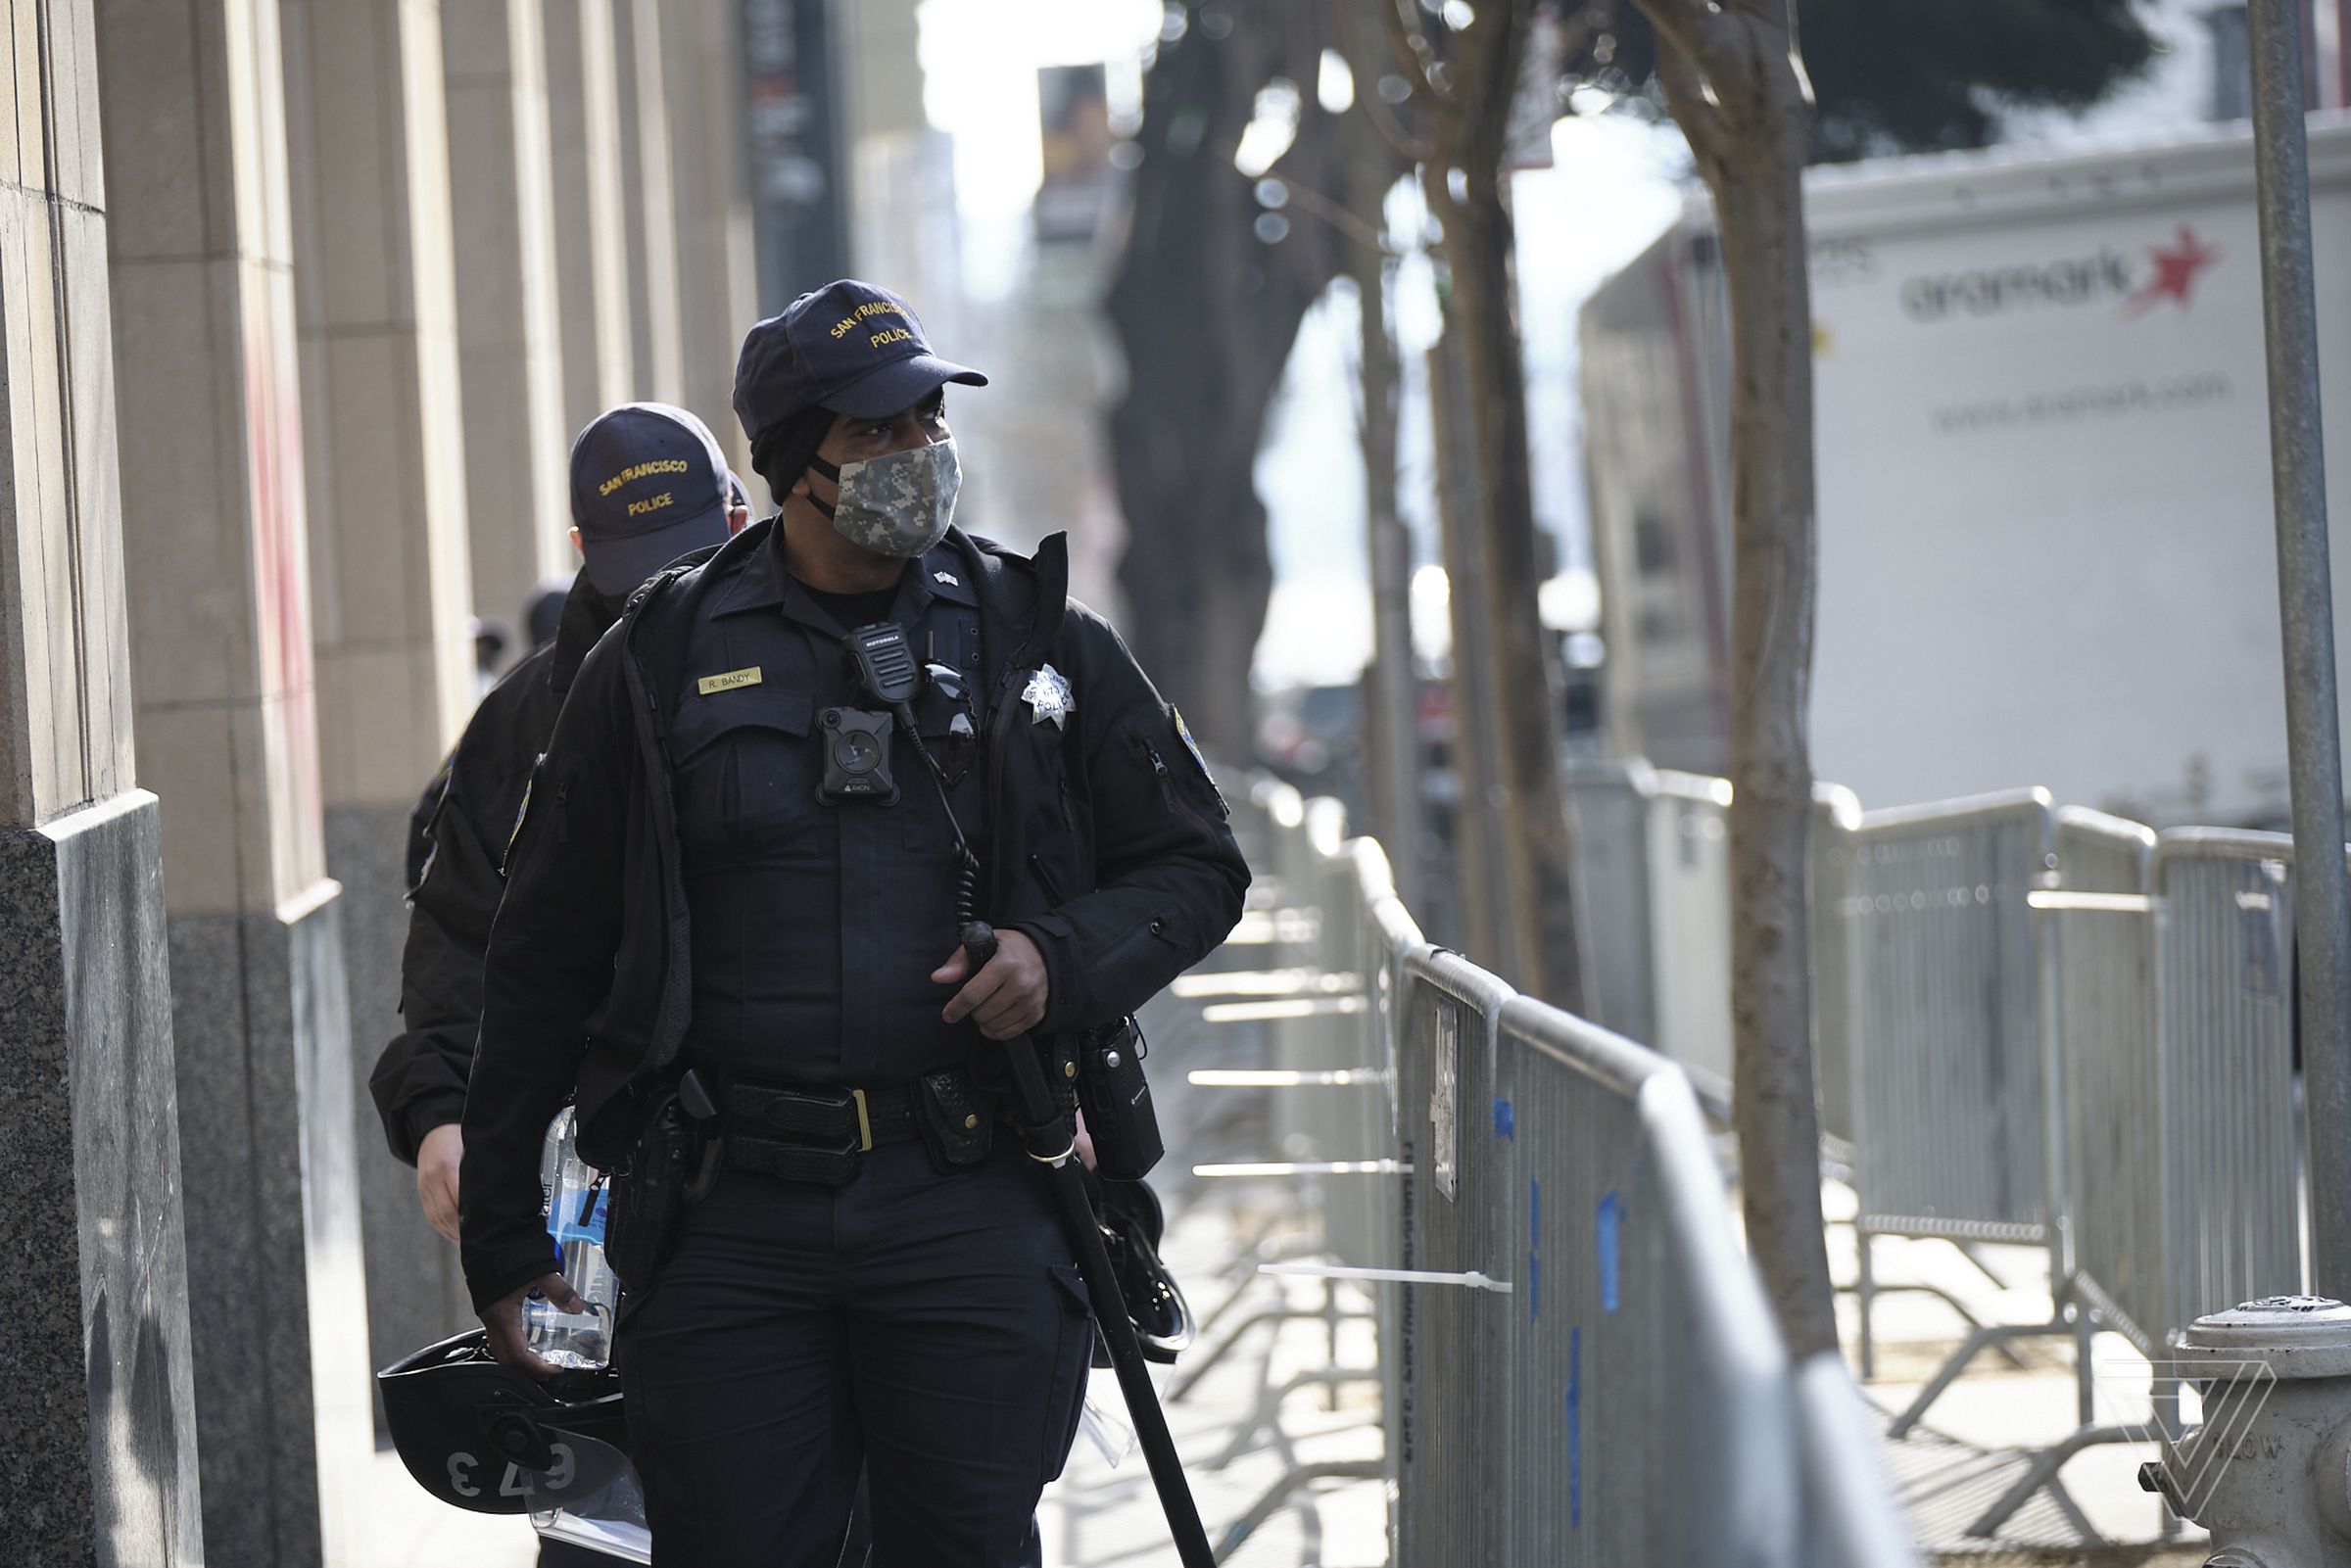 Moderate police presence at the Twitter headquarters in downtown San Francisco.